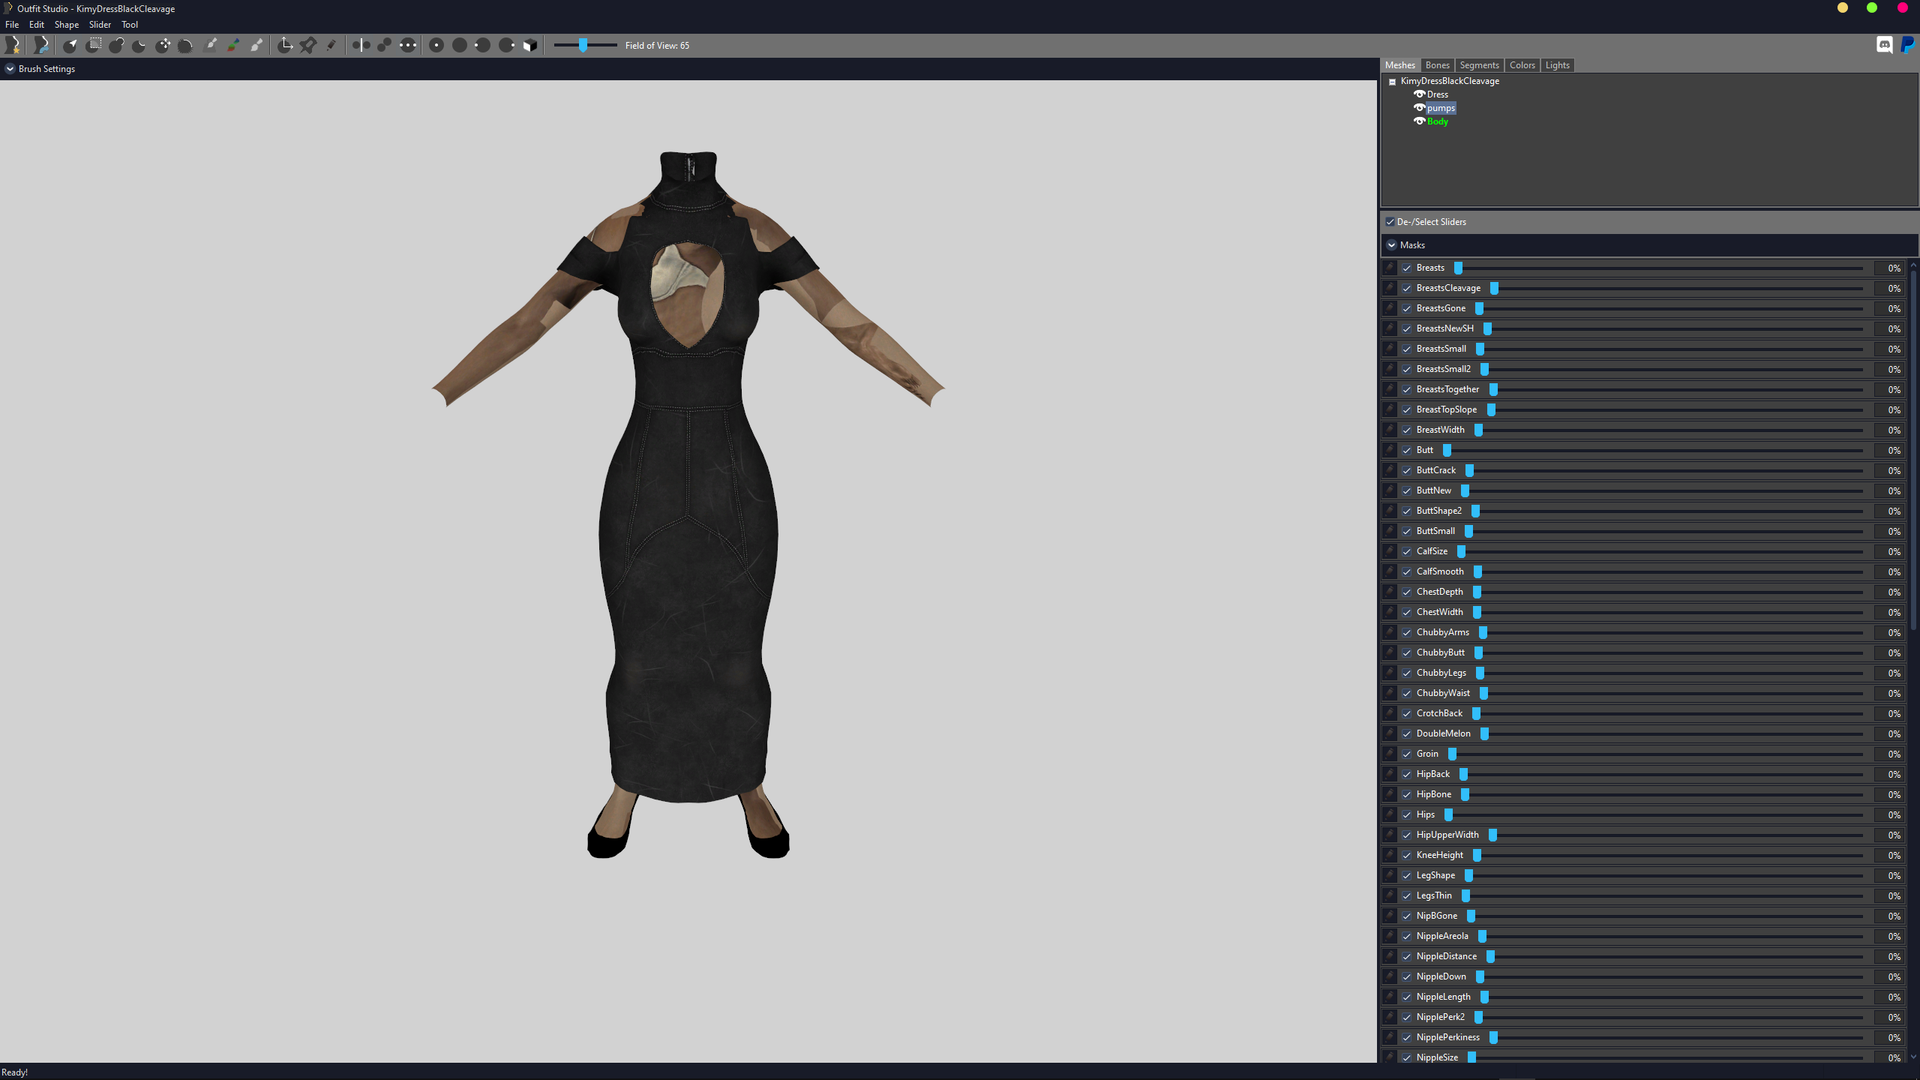 OutfitStudio_x64_2020-04-13_19-06-57.png